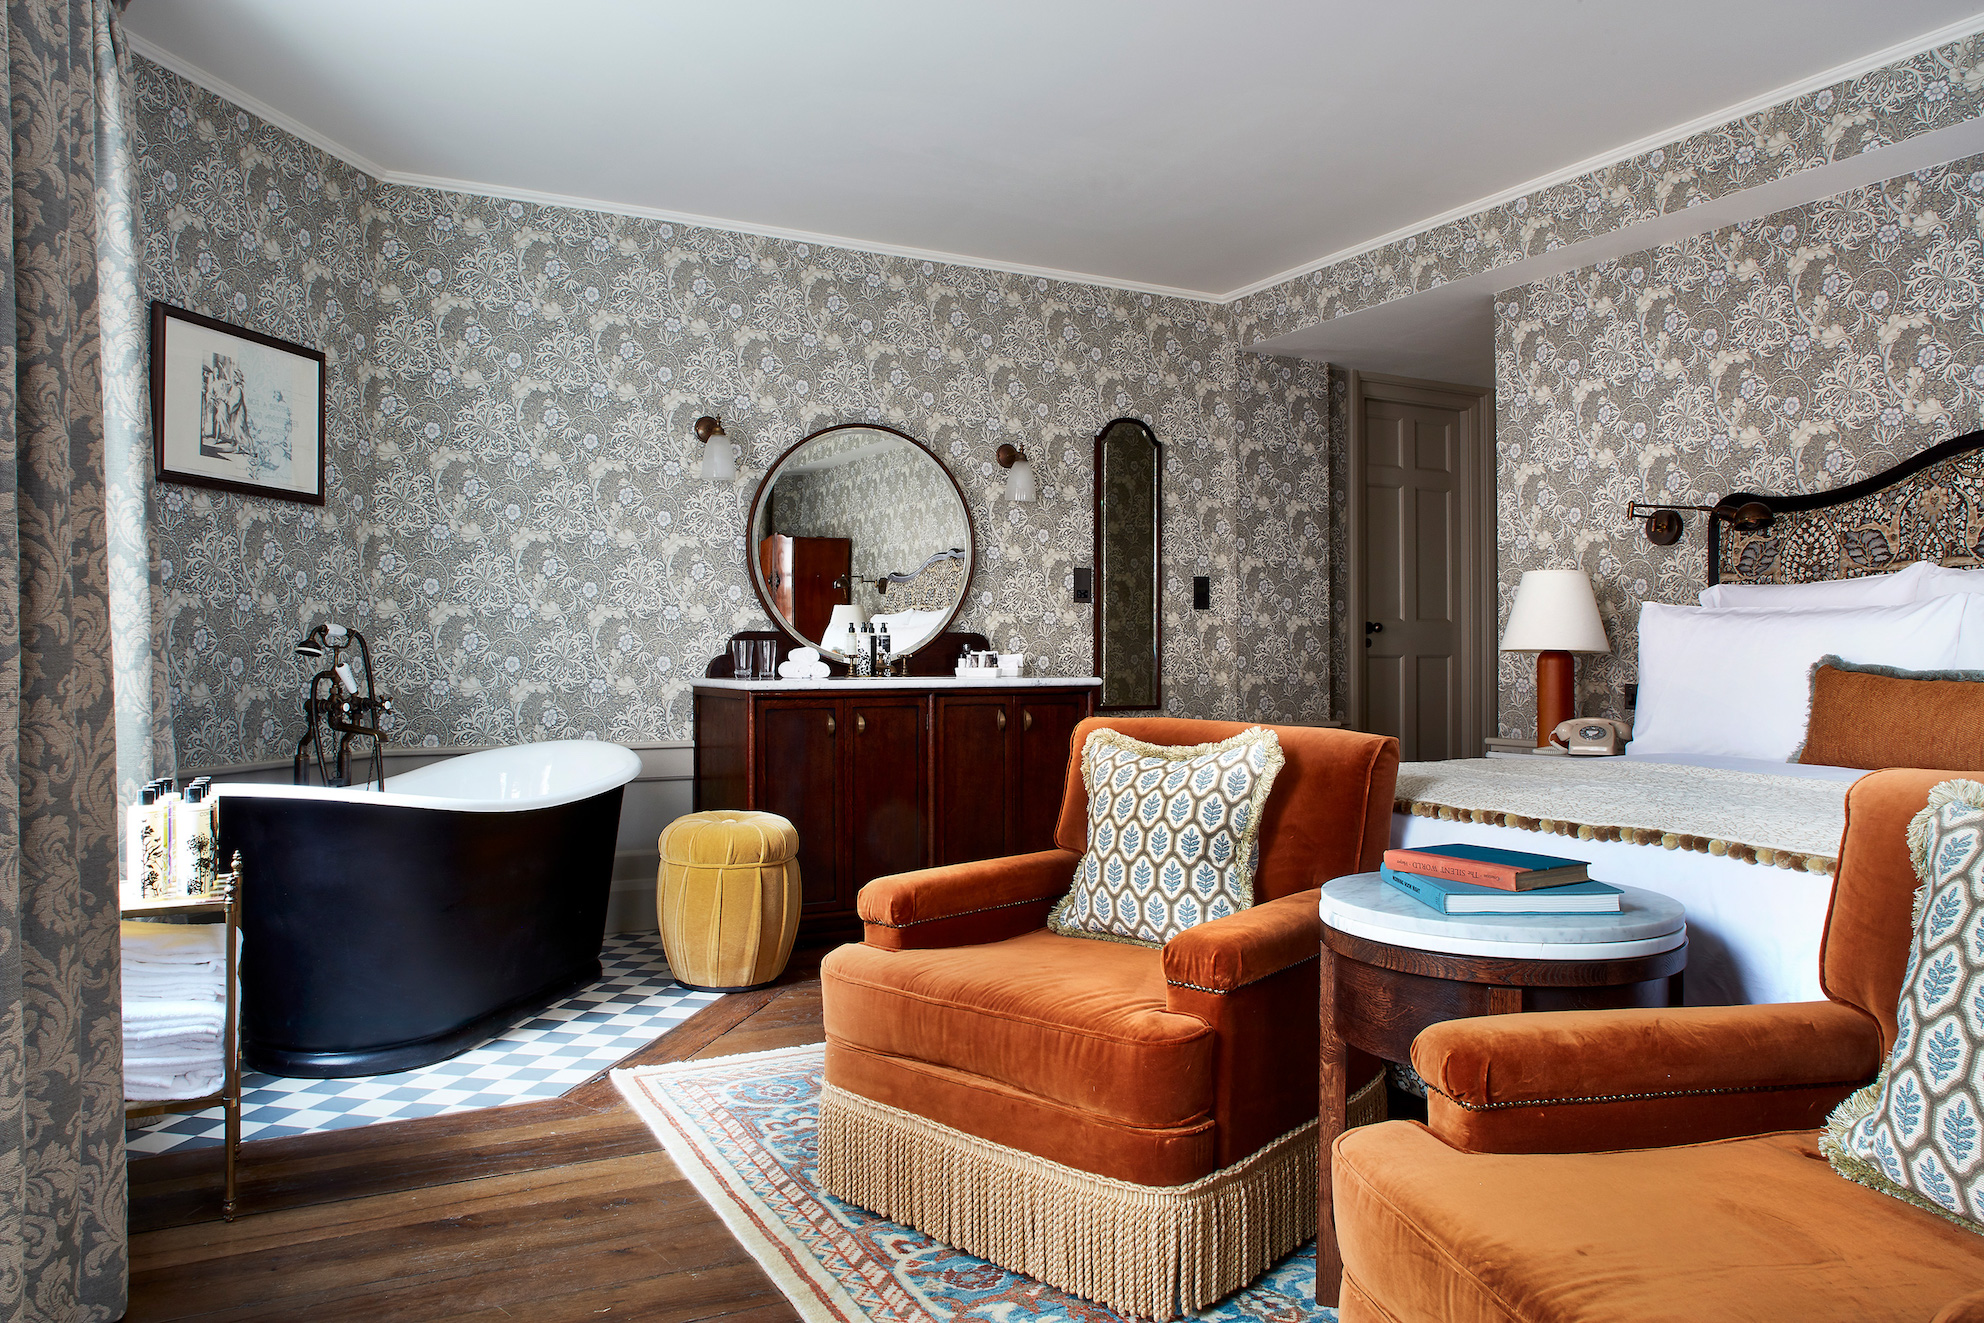 If that freestanding bath could talk… Kettner’s.